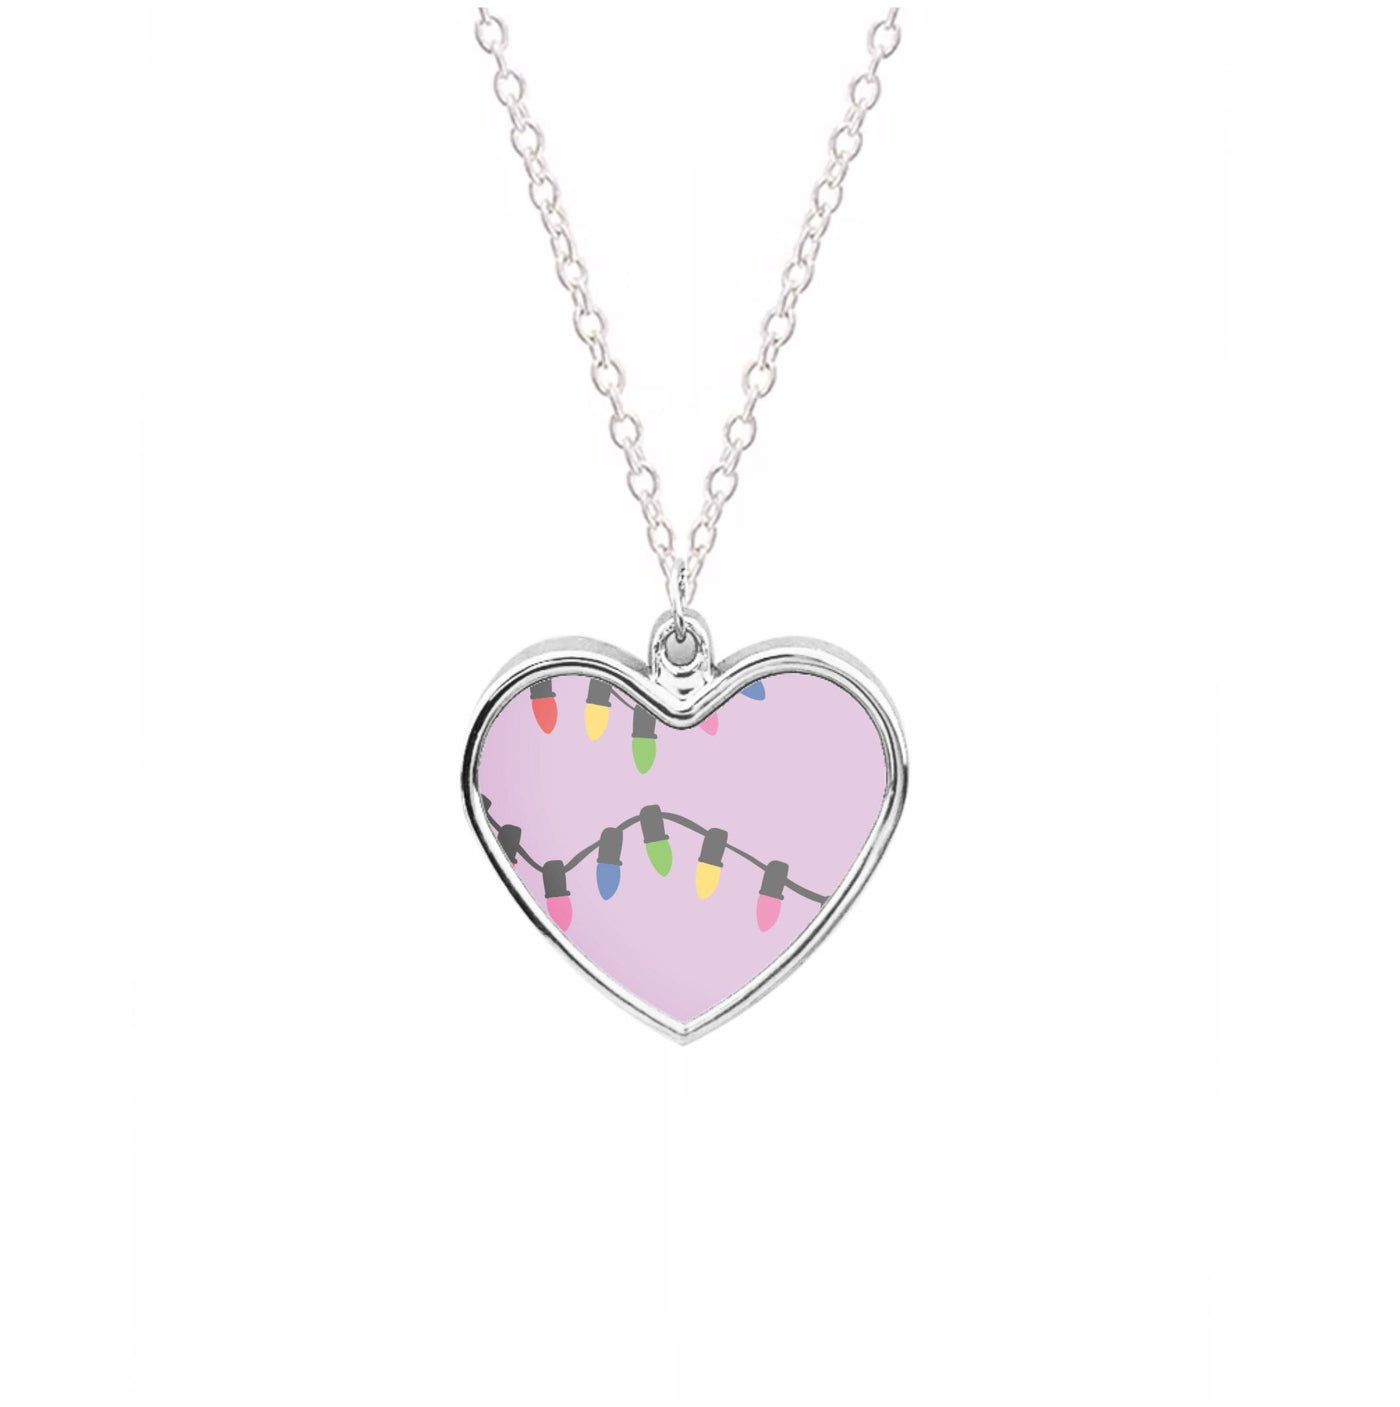 Pink Lights - Christmas Patterns Necklace